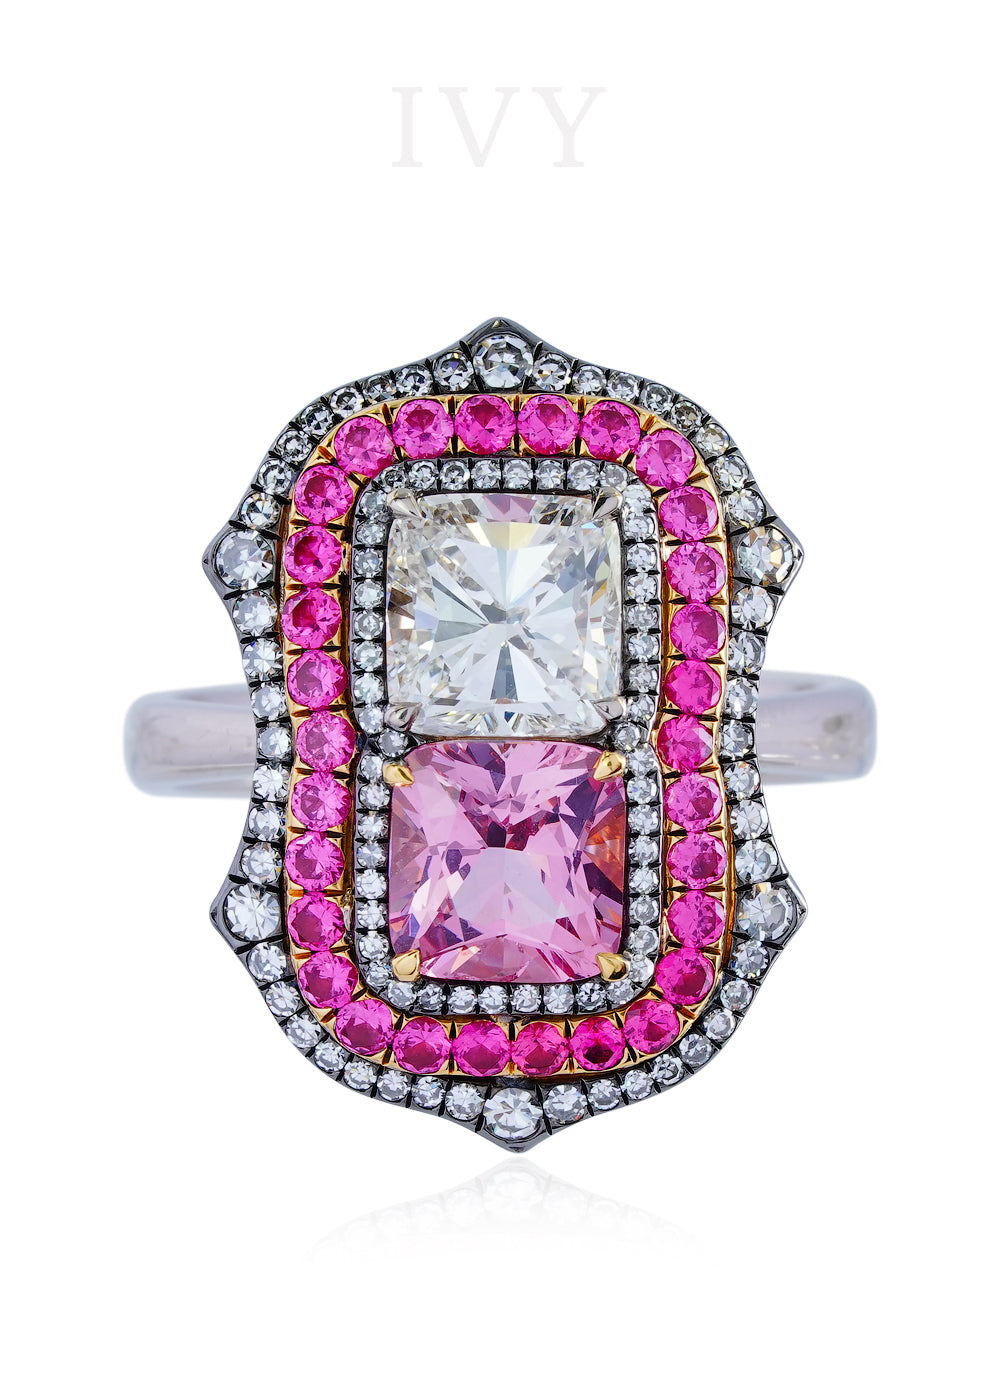 Pink Spinel and Diamond Gemini Ring